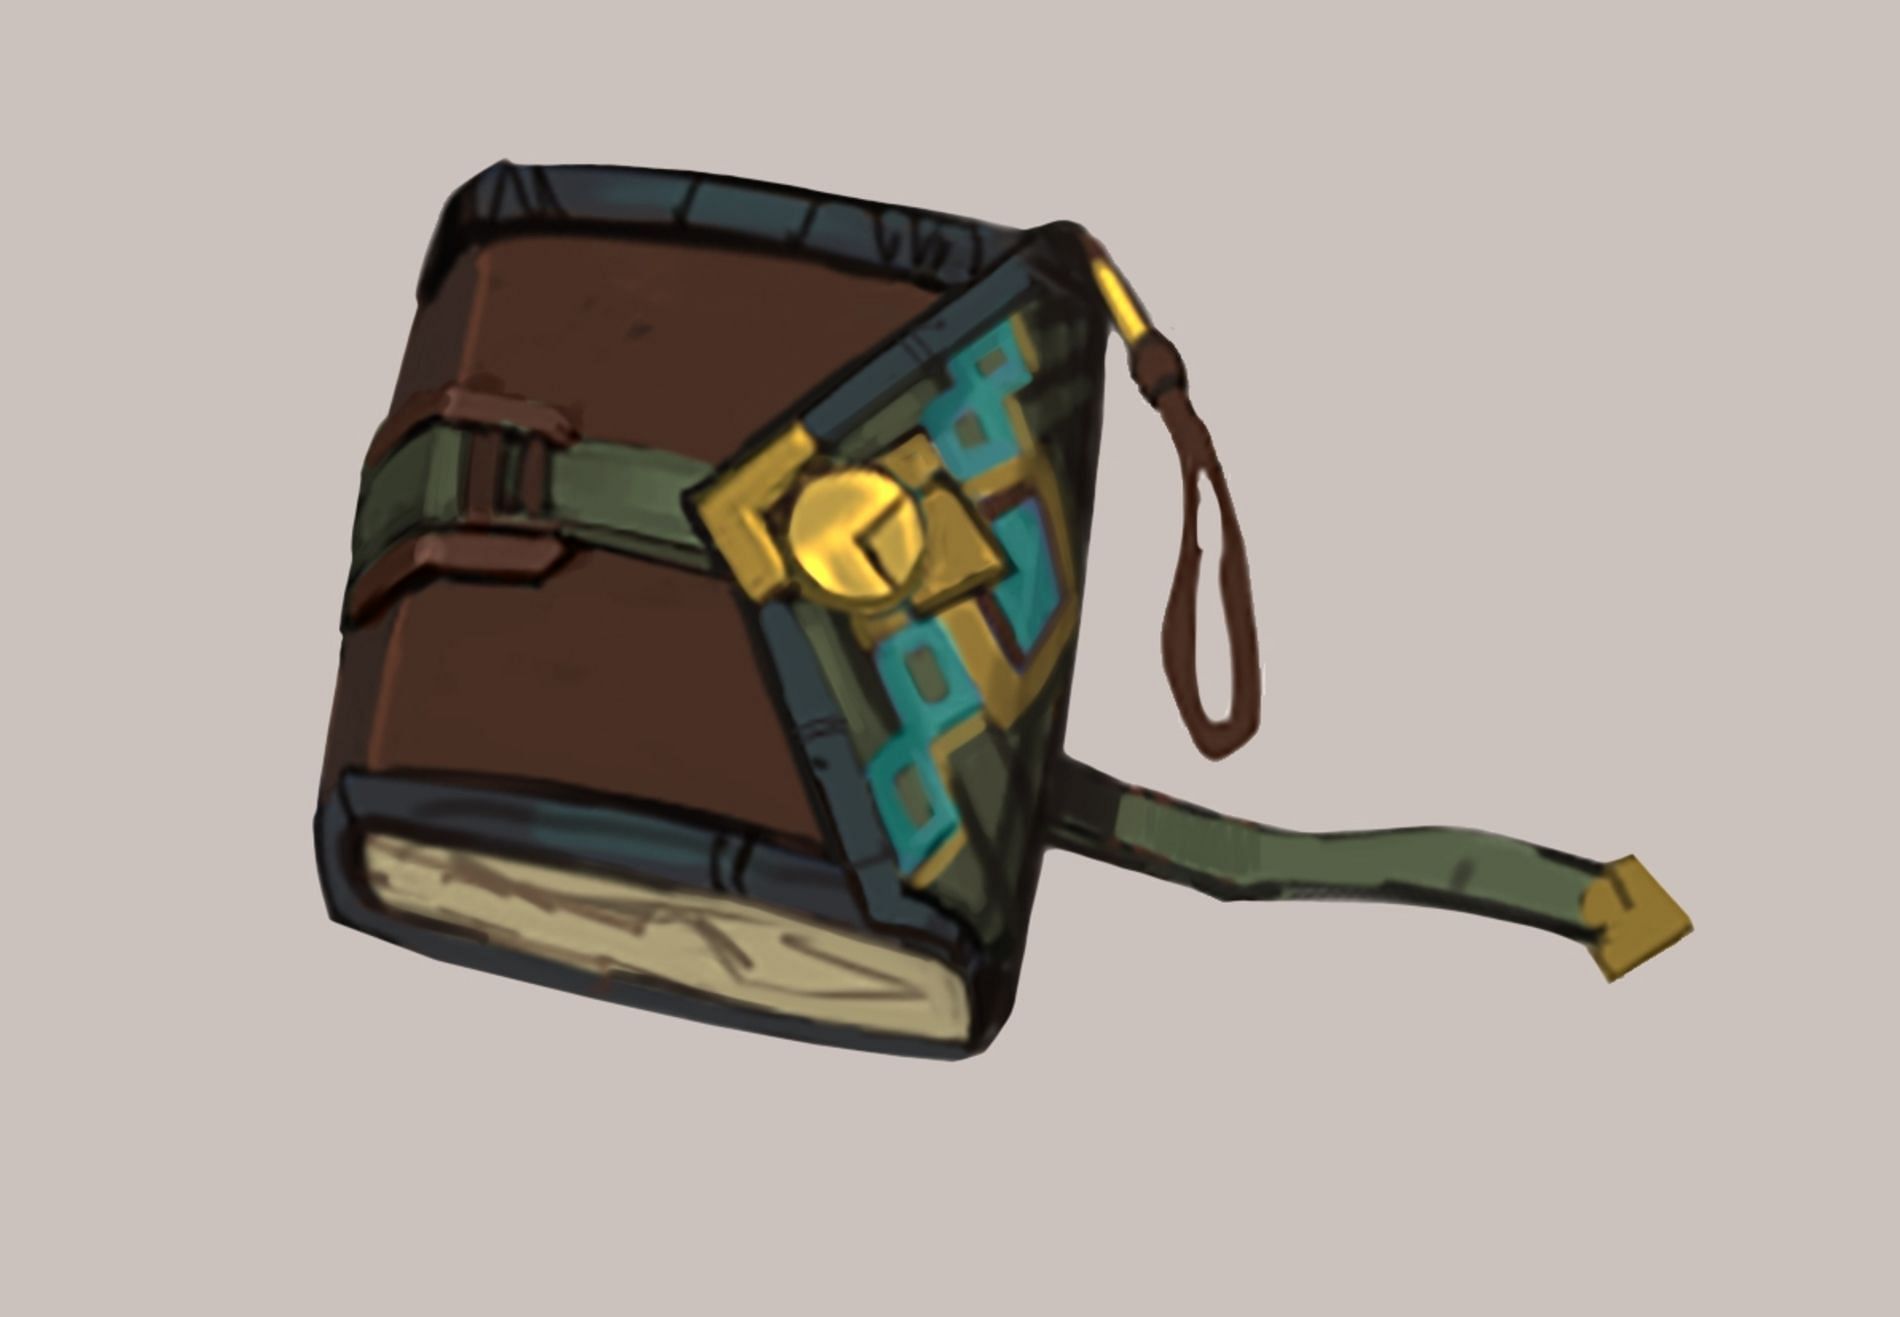 League of Legends' Tope's journal, whose details are yet to be revealed (Image via Riot Games)